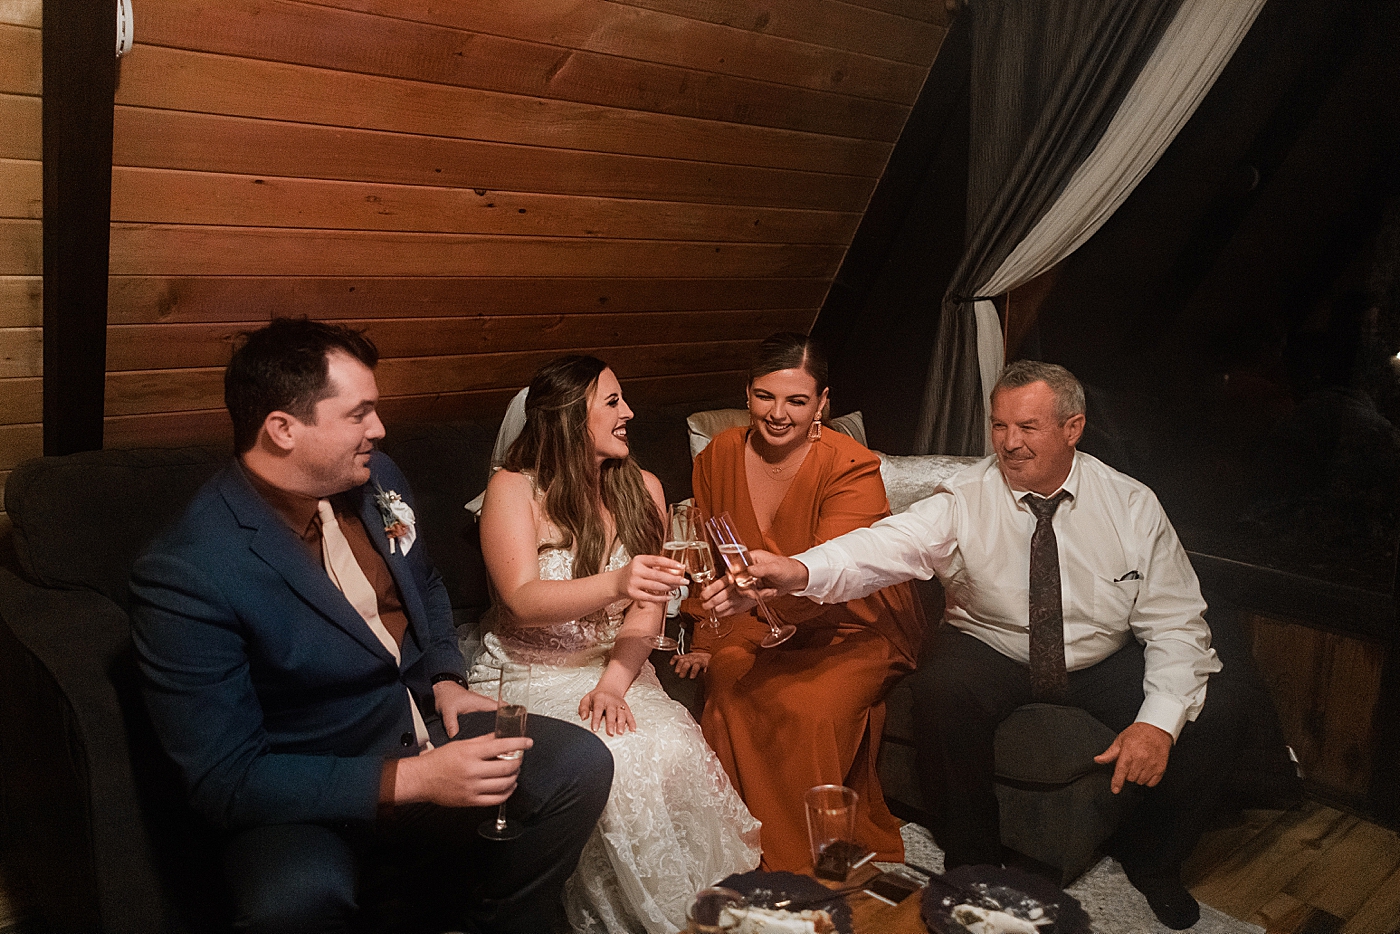 Small reception with family after elopement at Mt Rainier | Megan Montalvo Photography